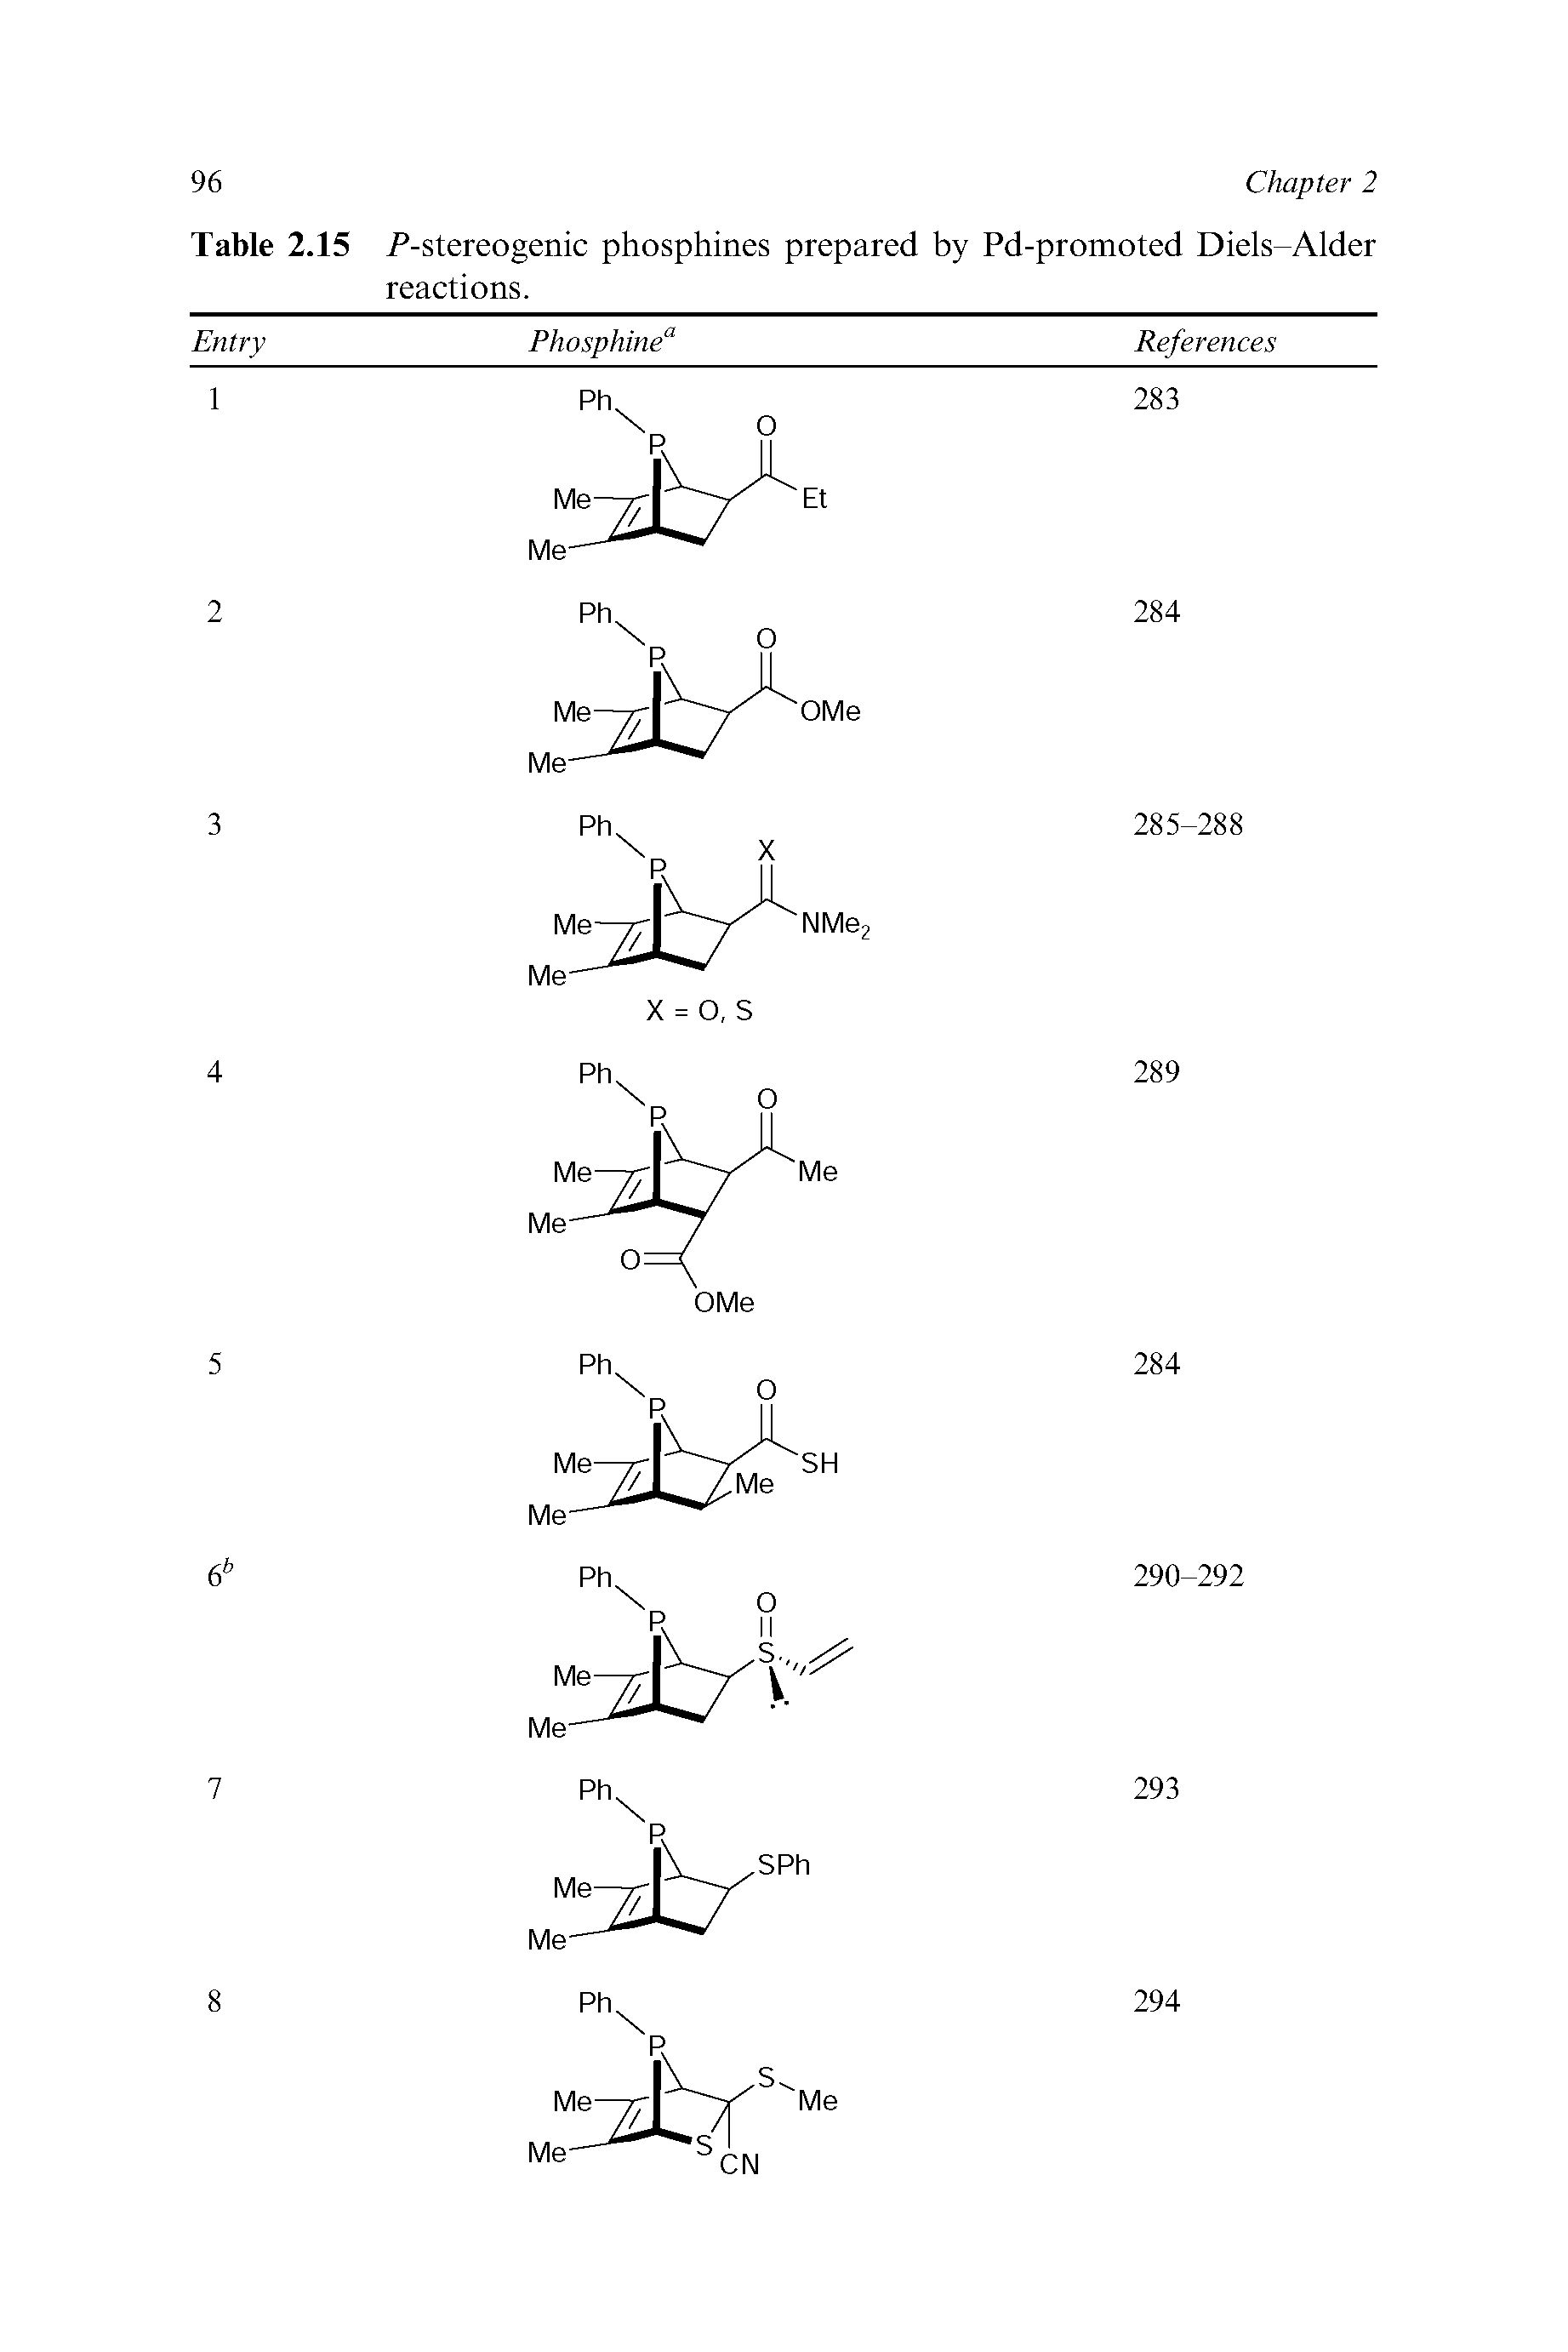 Table 2.15 P-stereogenic phosphines prepared by Pd-promoted Diels-Alder reactions.